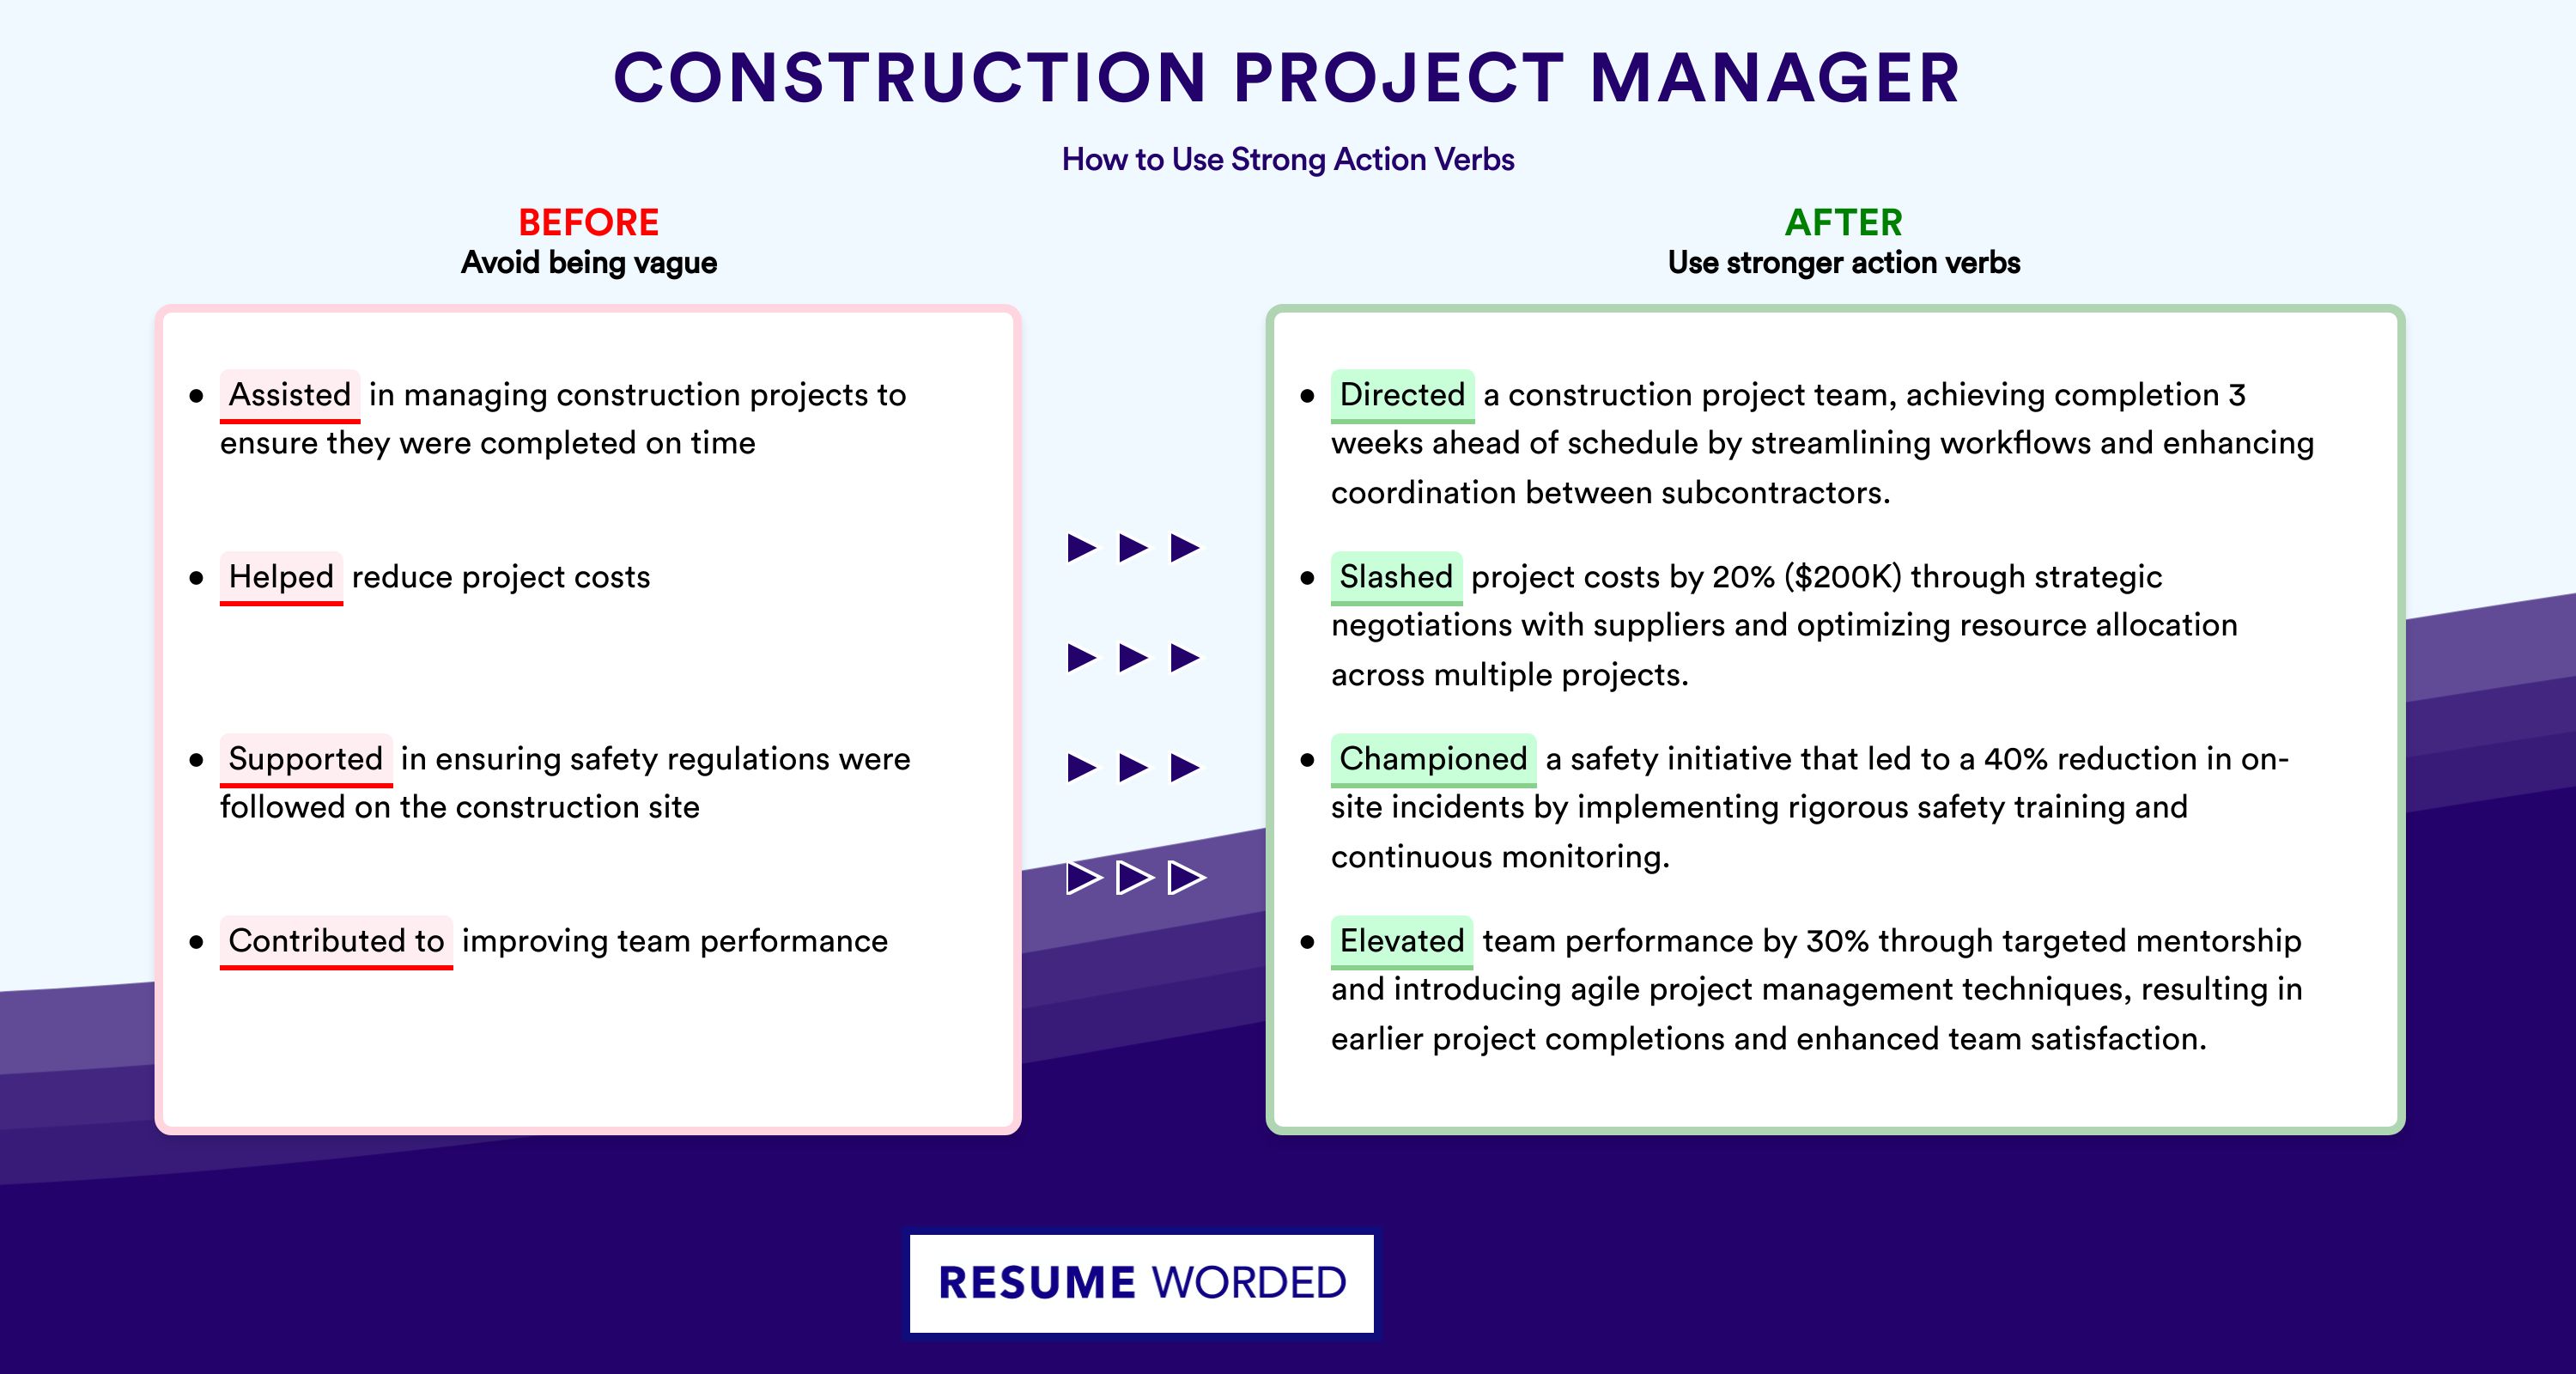 Action Verbs for Construction Project Manager